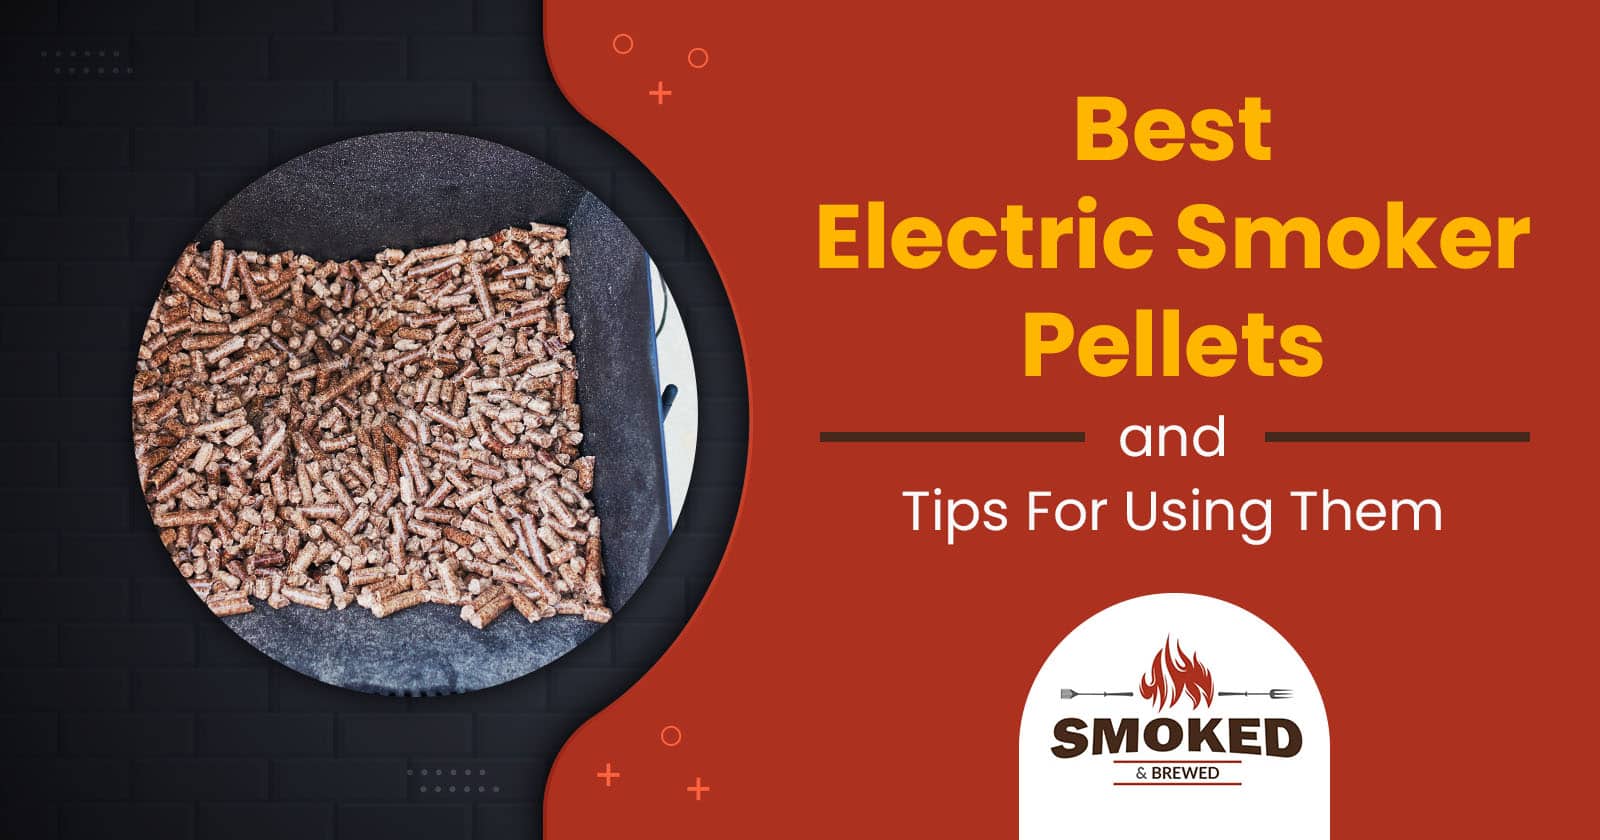 Best Electric Smoker Pellets and Tips for Using Them